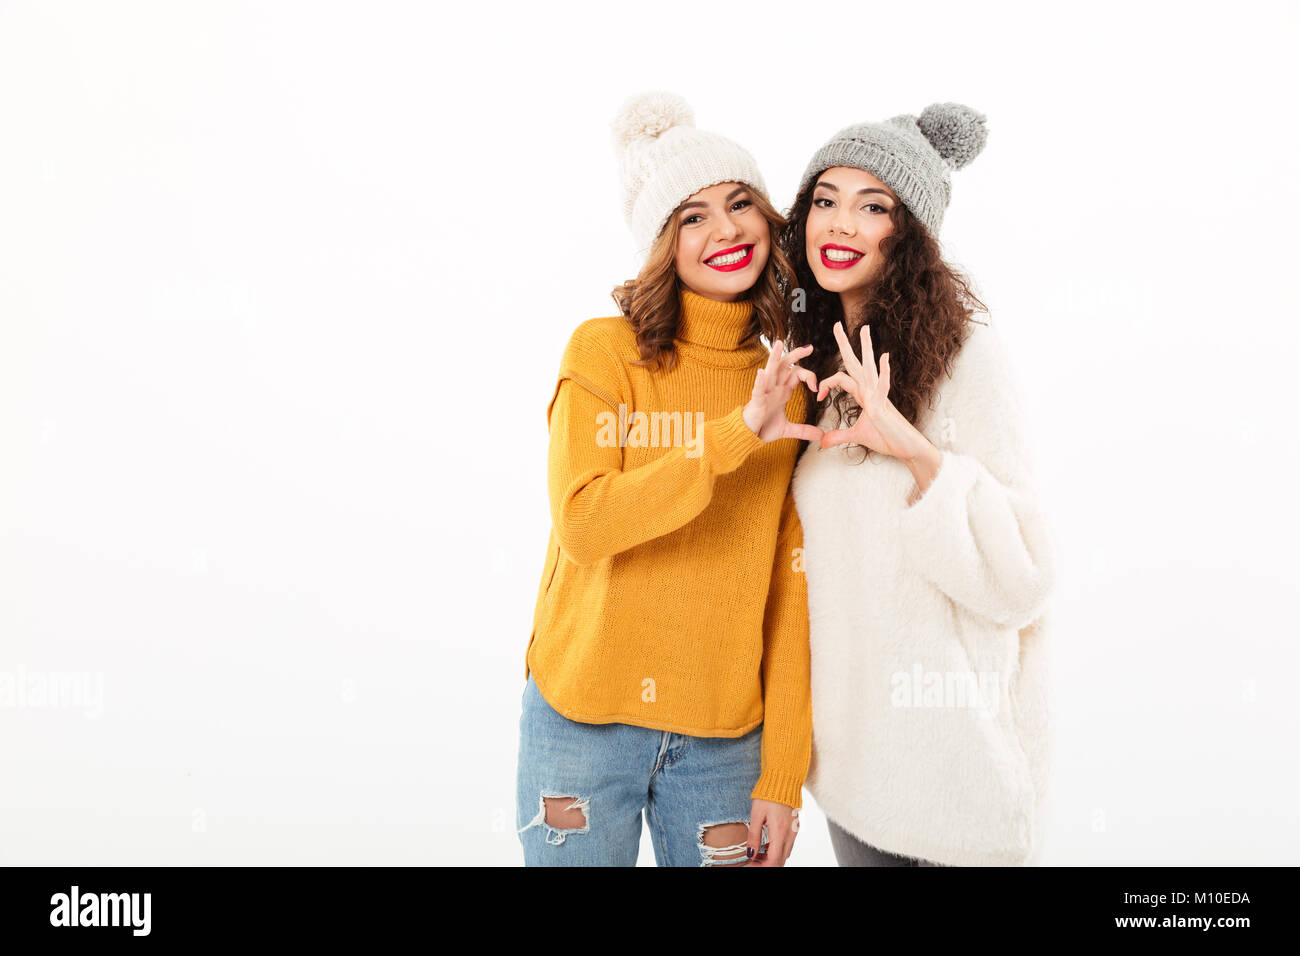 Two smiling girls in sweaters and hats making heart sign while looking at the camera over white background Stock Photo